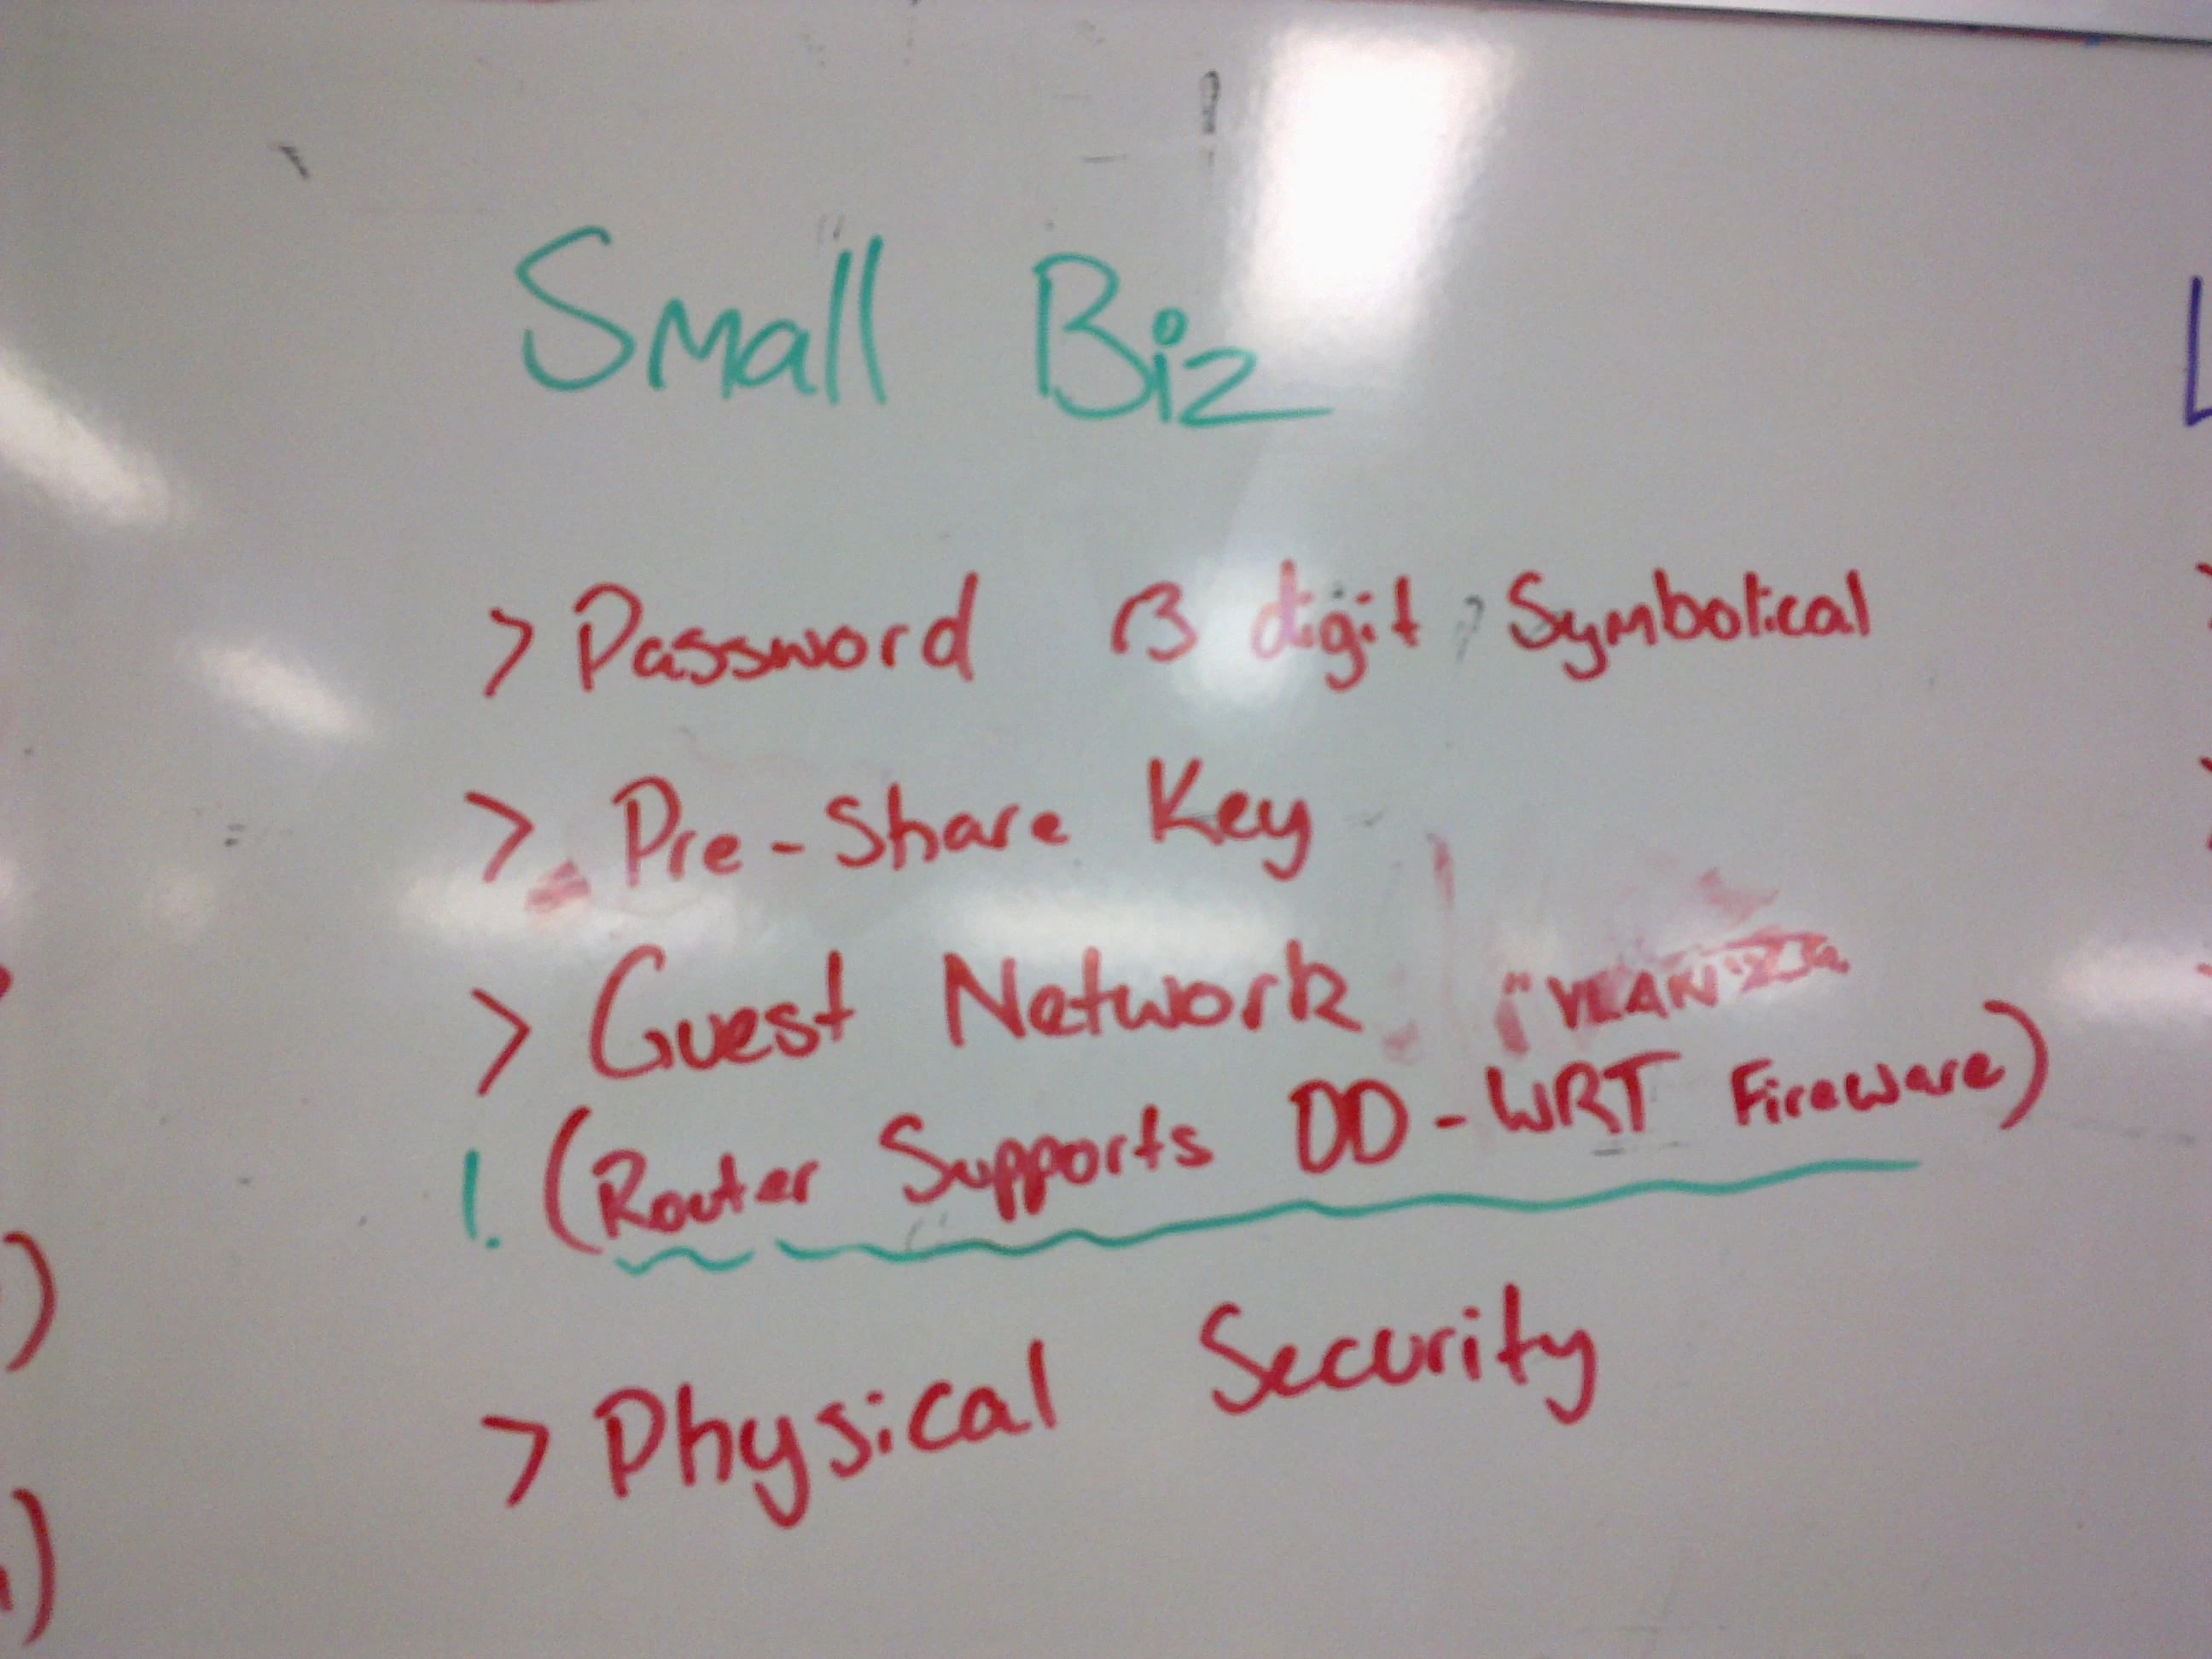 Password rules for small businesses.